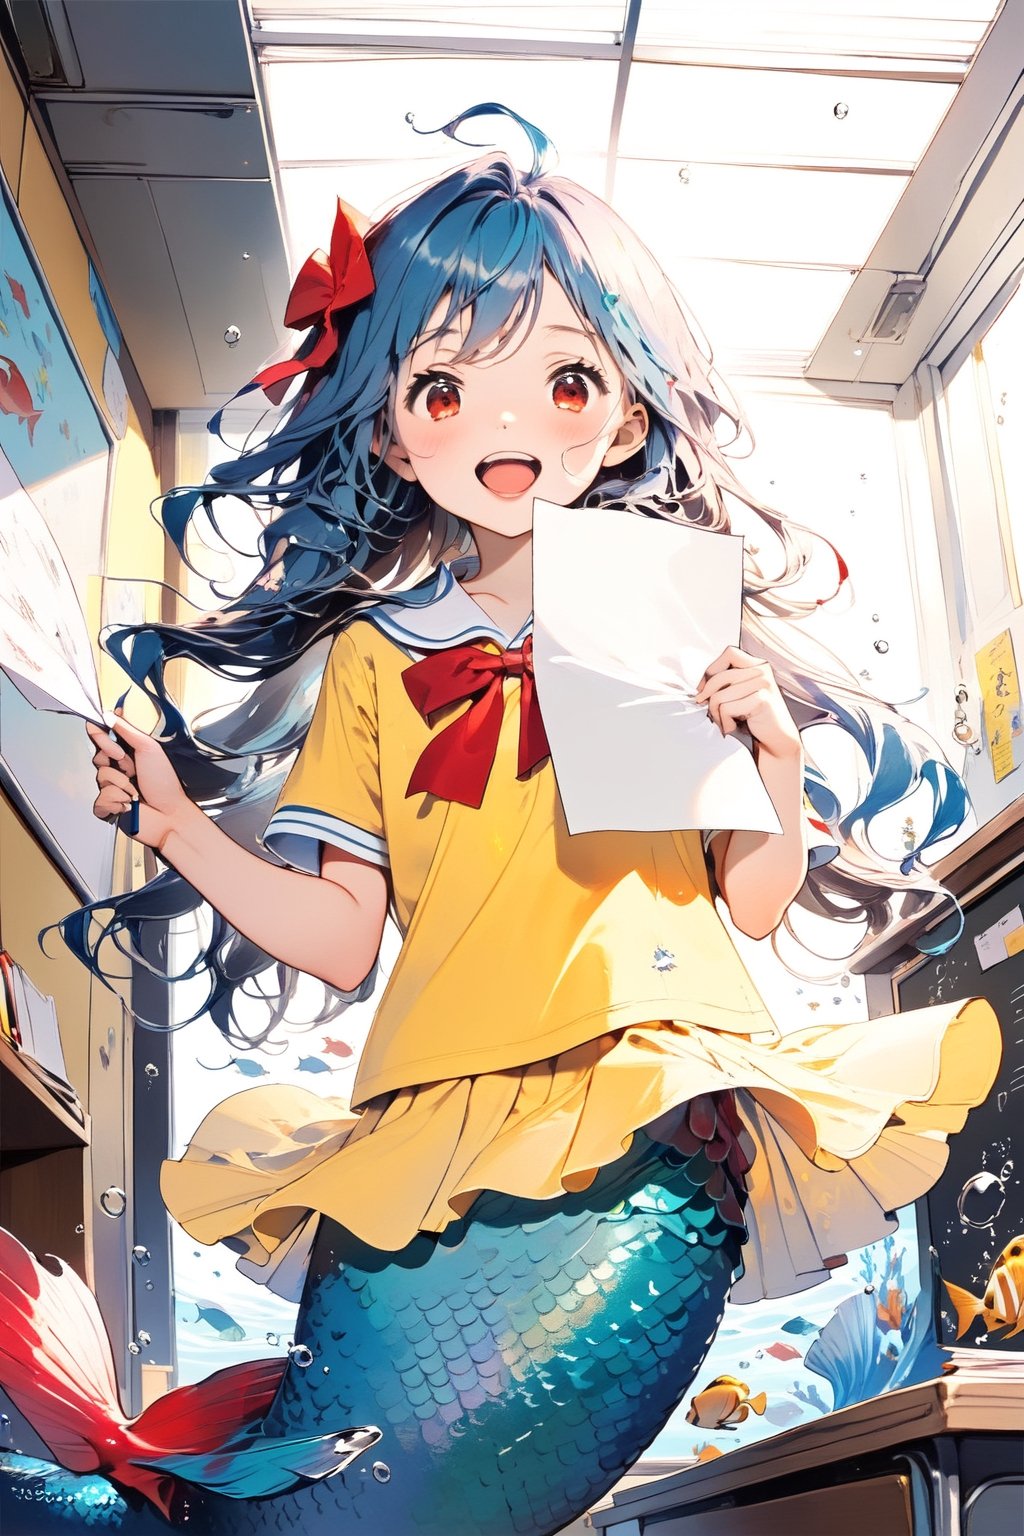 //quality, (masterpiece:1.4), (detailed), ((,best quality,)),//1girl,(mermaid:1.4),(loli:1.3), child,cute,//,(blue_hair:1.3),ahoge,floating_hair, detailed_eyes,(red eyes:1.2),//,bows,(yellow kindergarten uniform:1.3), yellow dress,//,smile,mouth_open,teeth,//,(holding paper:1.1),(facing_viewer, straight-on:1.4),//,(classroom:1.4), (back_against_wall:1.1), (blackboard:1.3),(indoors:1.3),detailed room, underwater,(fish:1.2), bubbles,close_up,( comic:1.4)